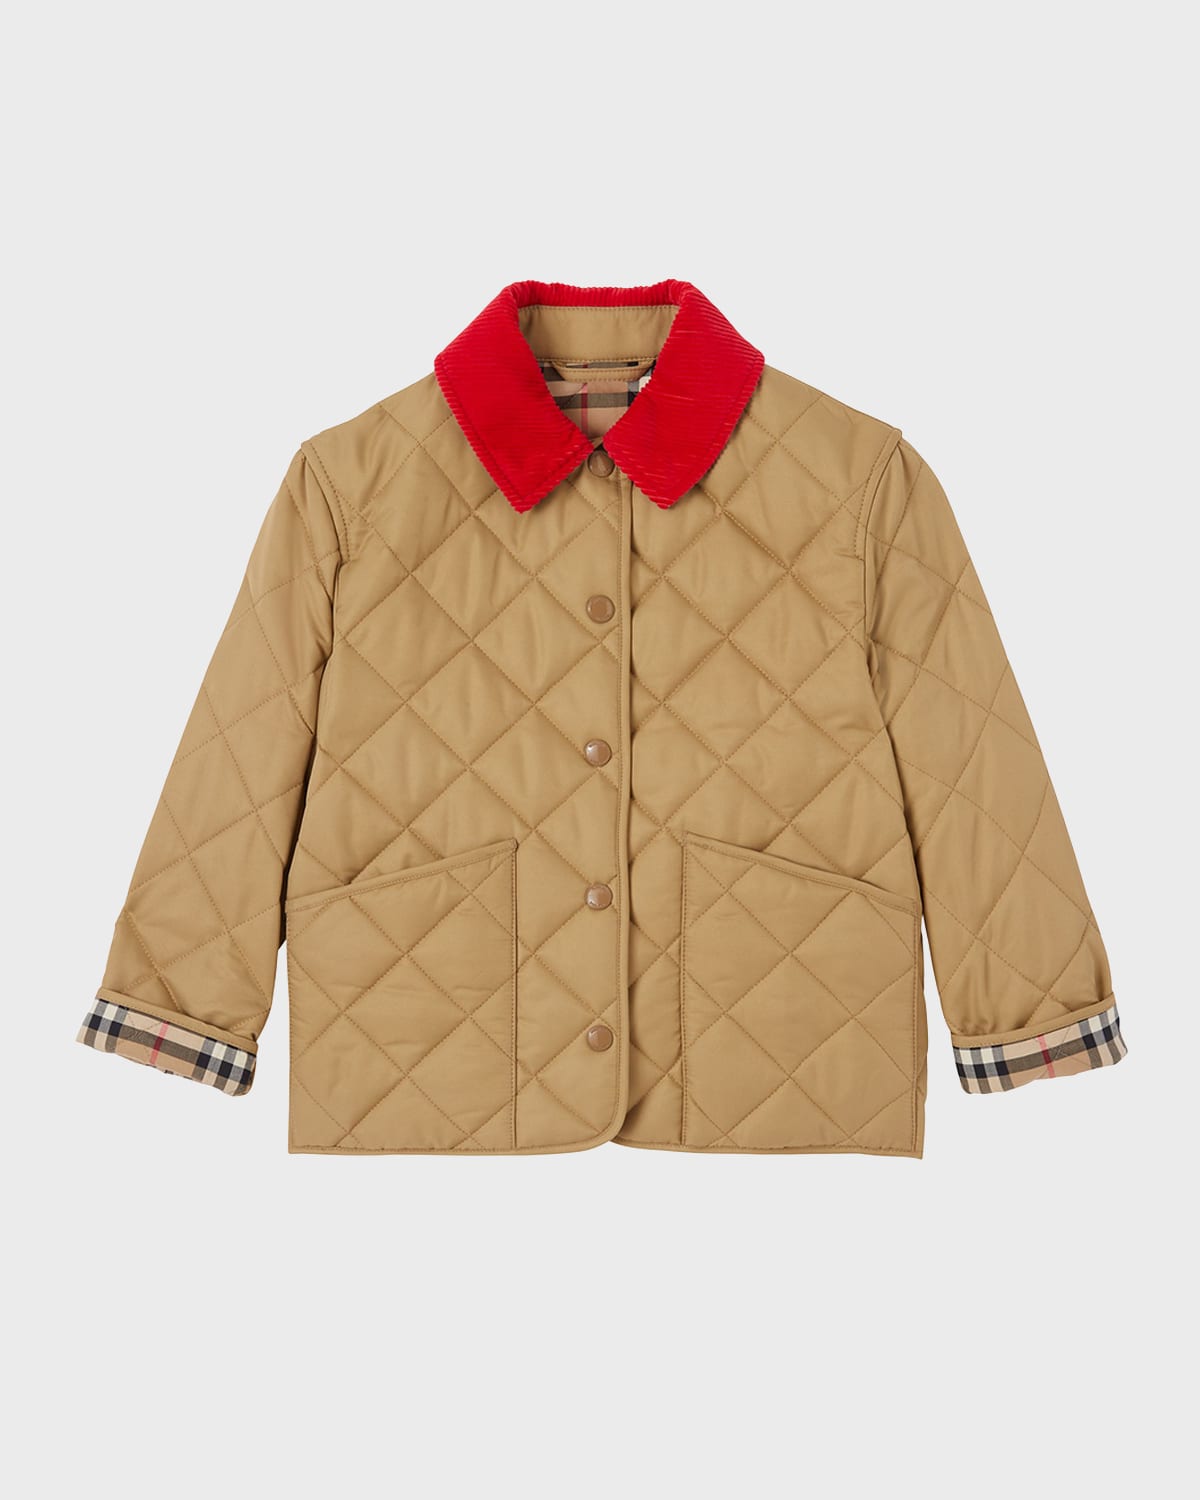 BURBERRY KID'S DALEY DIAMOND QUILTED JACKET